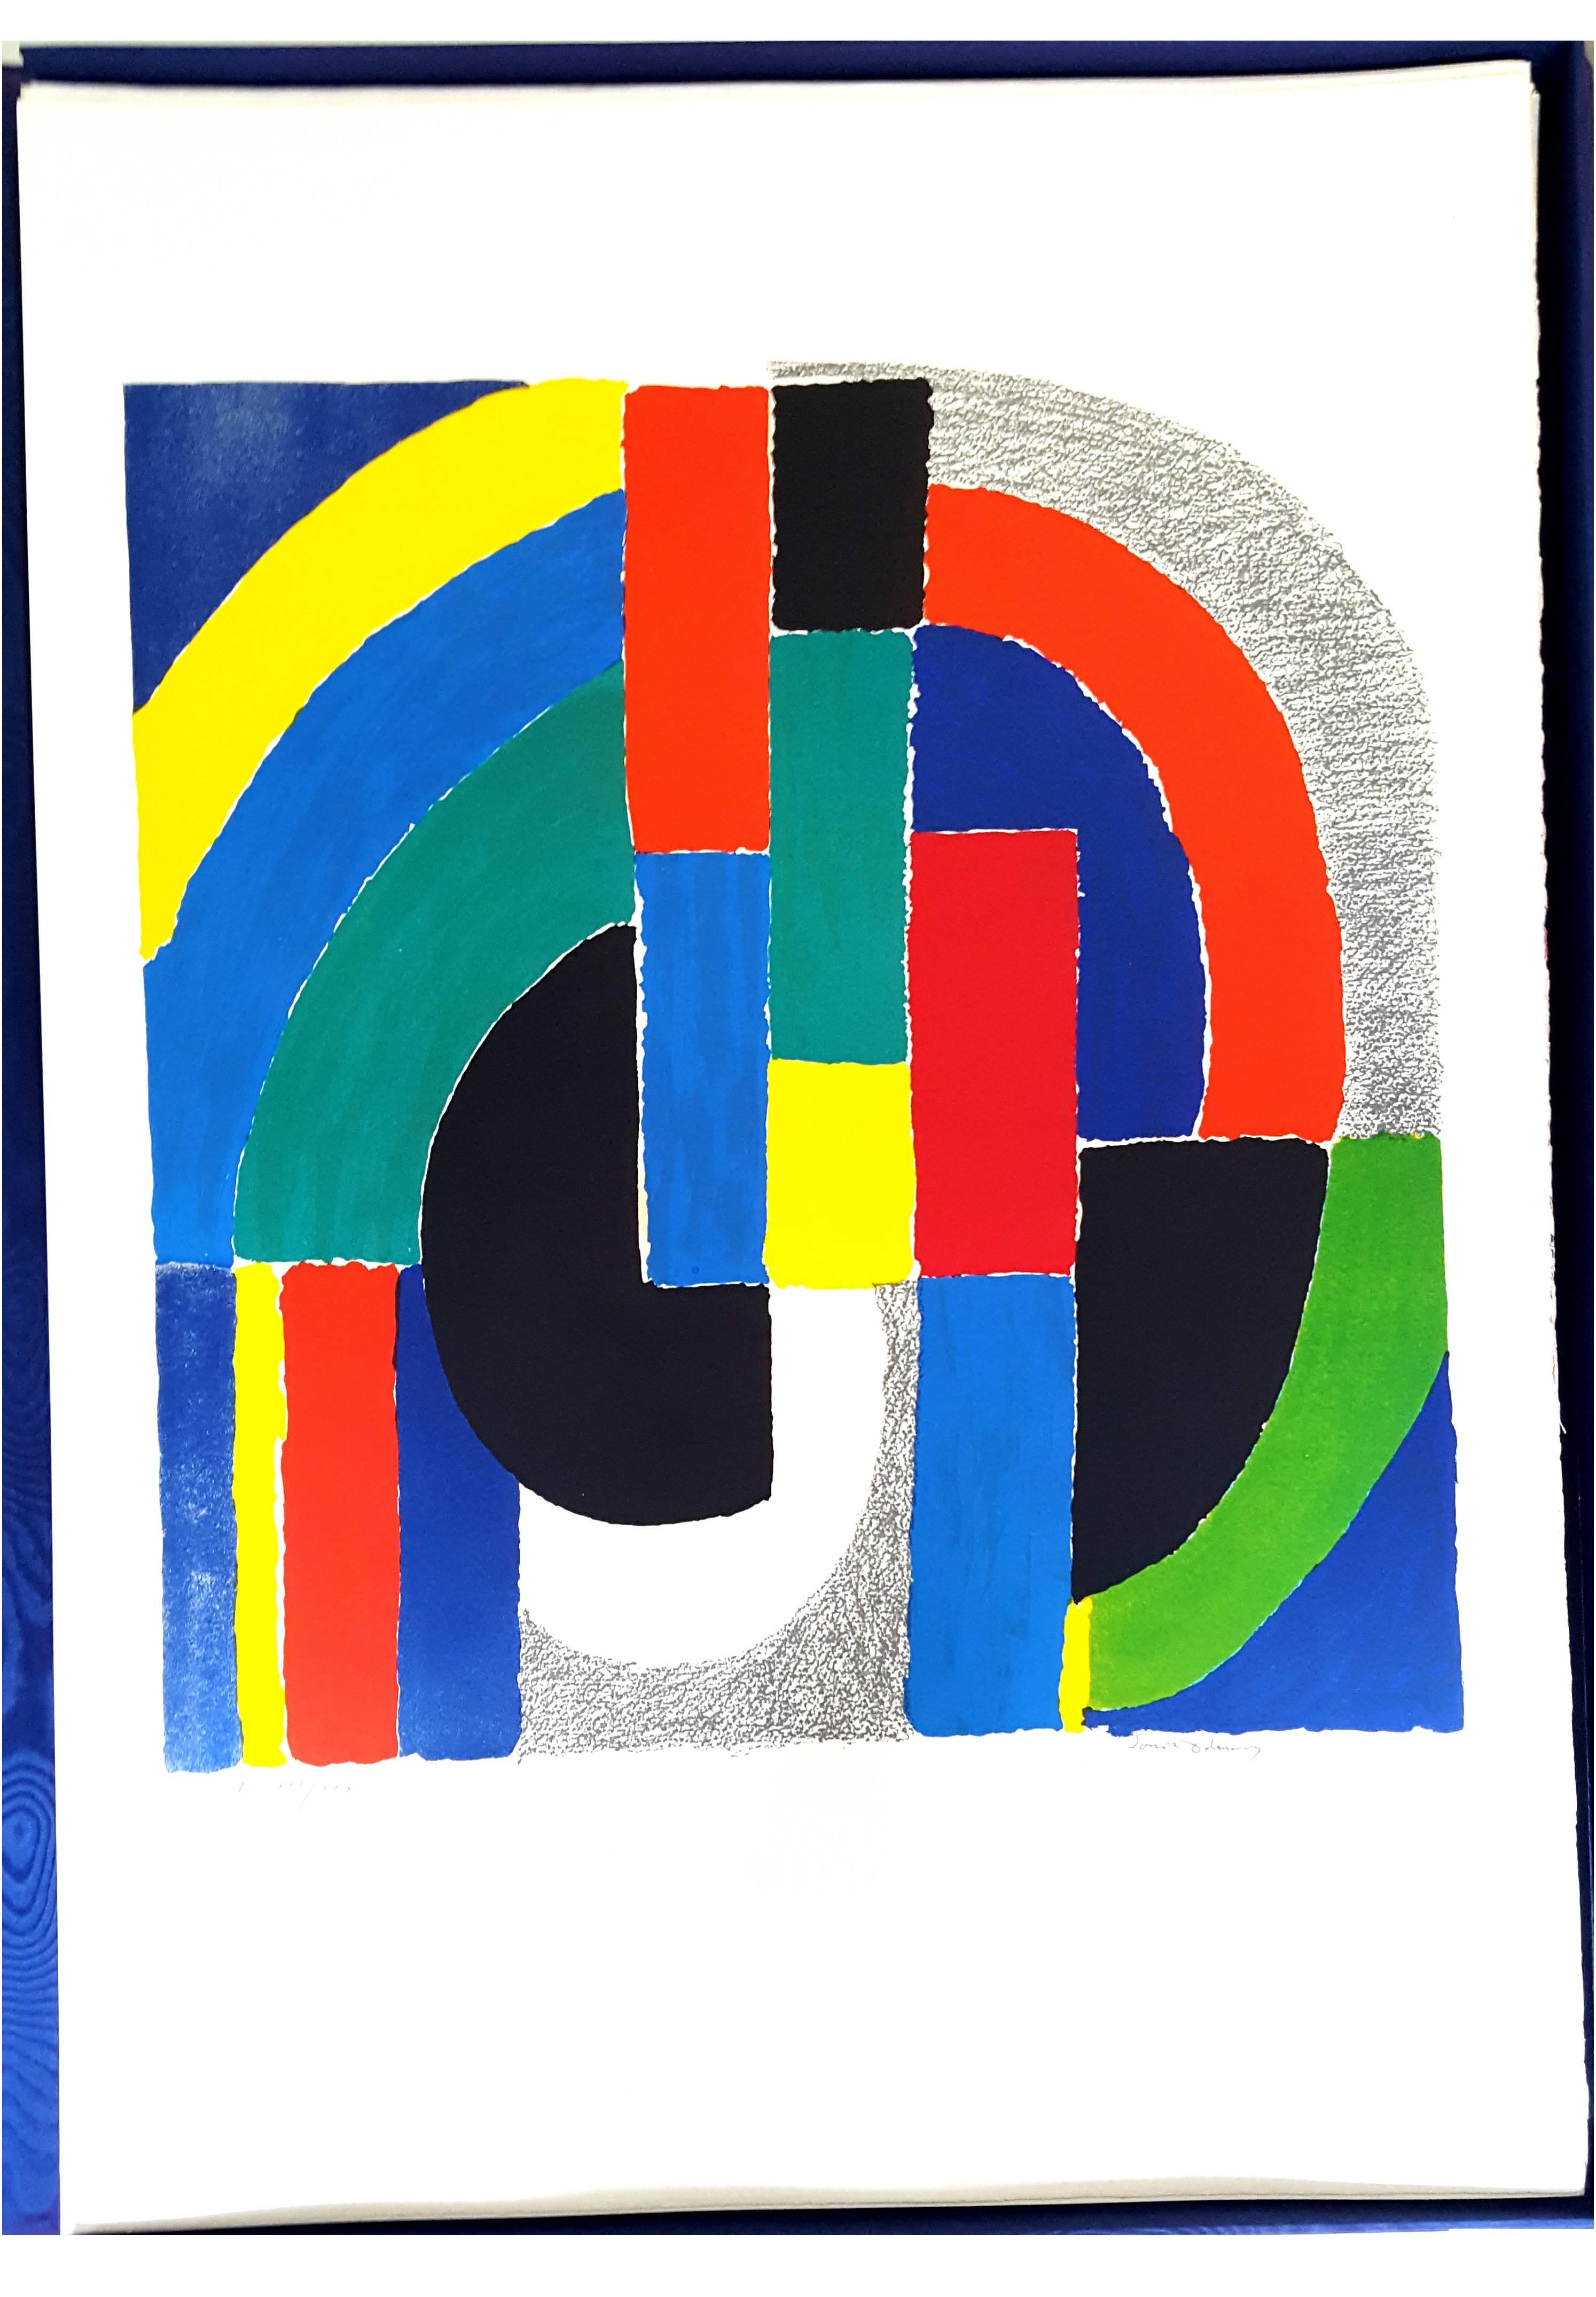 Sonia Delaunay 
Original Handsigned Lithograph 
Dimensions: 76 x 54 cm
Edition: HC XXI/XXX
HandSigned and Numbered
Ecole de Paris au seuil de la mutation des Arts
Sentiers Editions 

Sonia Delaunay was known for her vivid use of color and her bold,